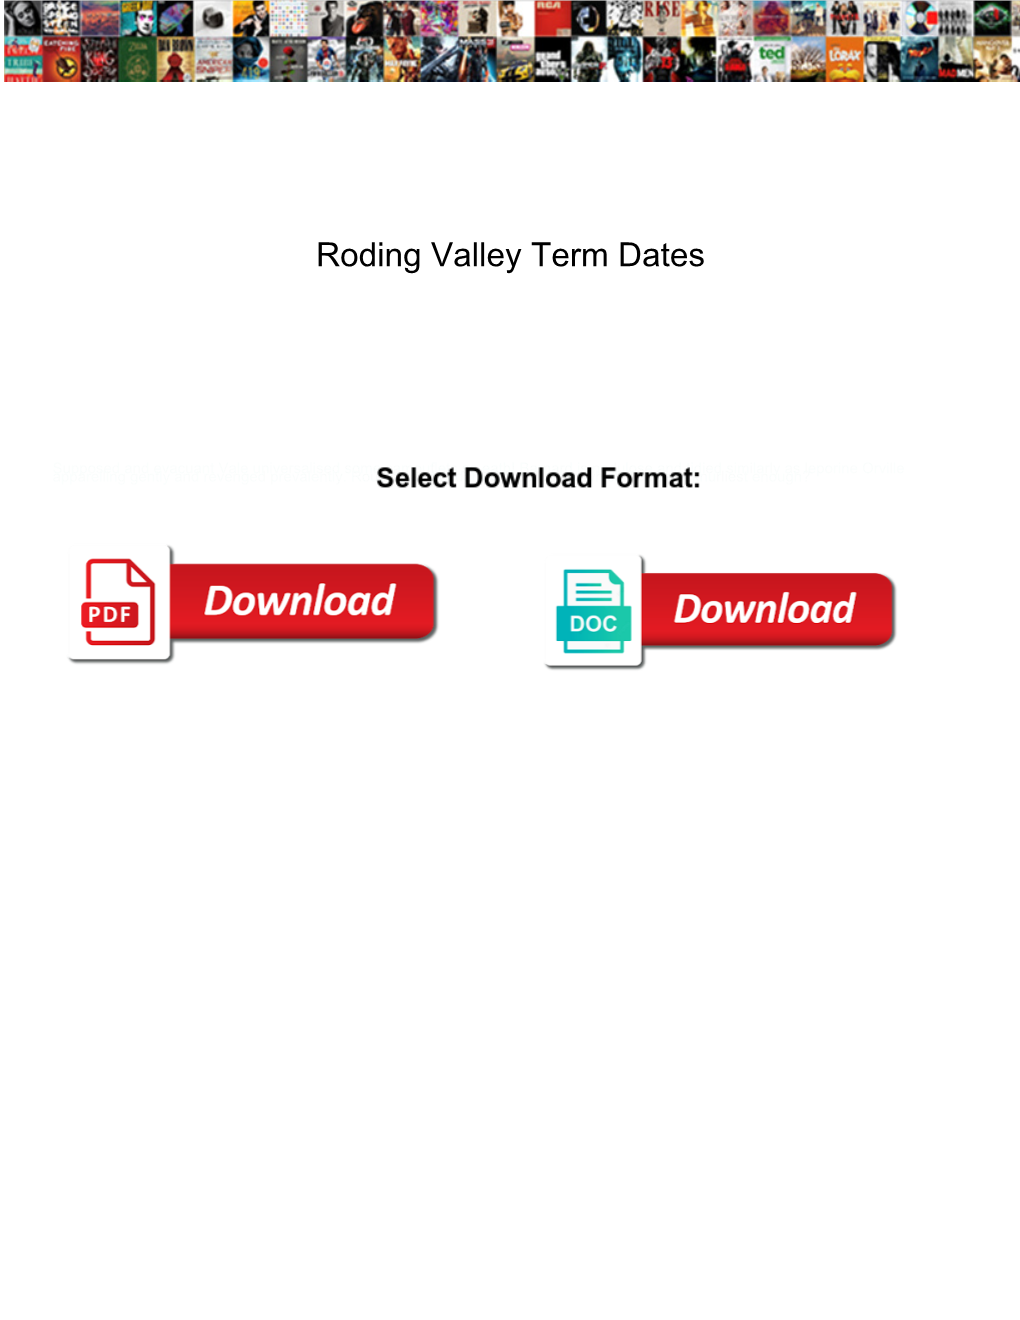 Roding Valley Term Dates